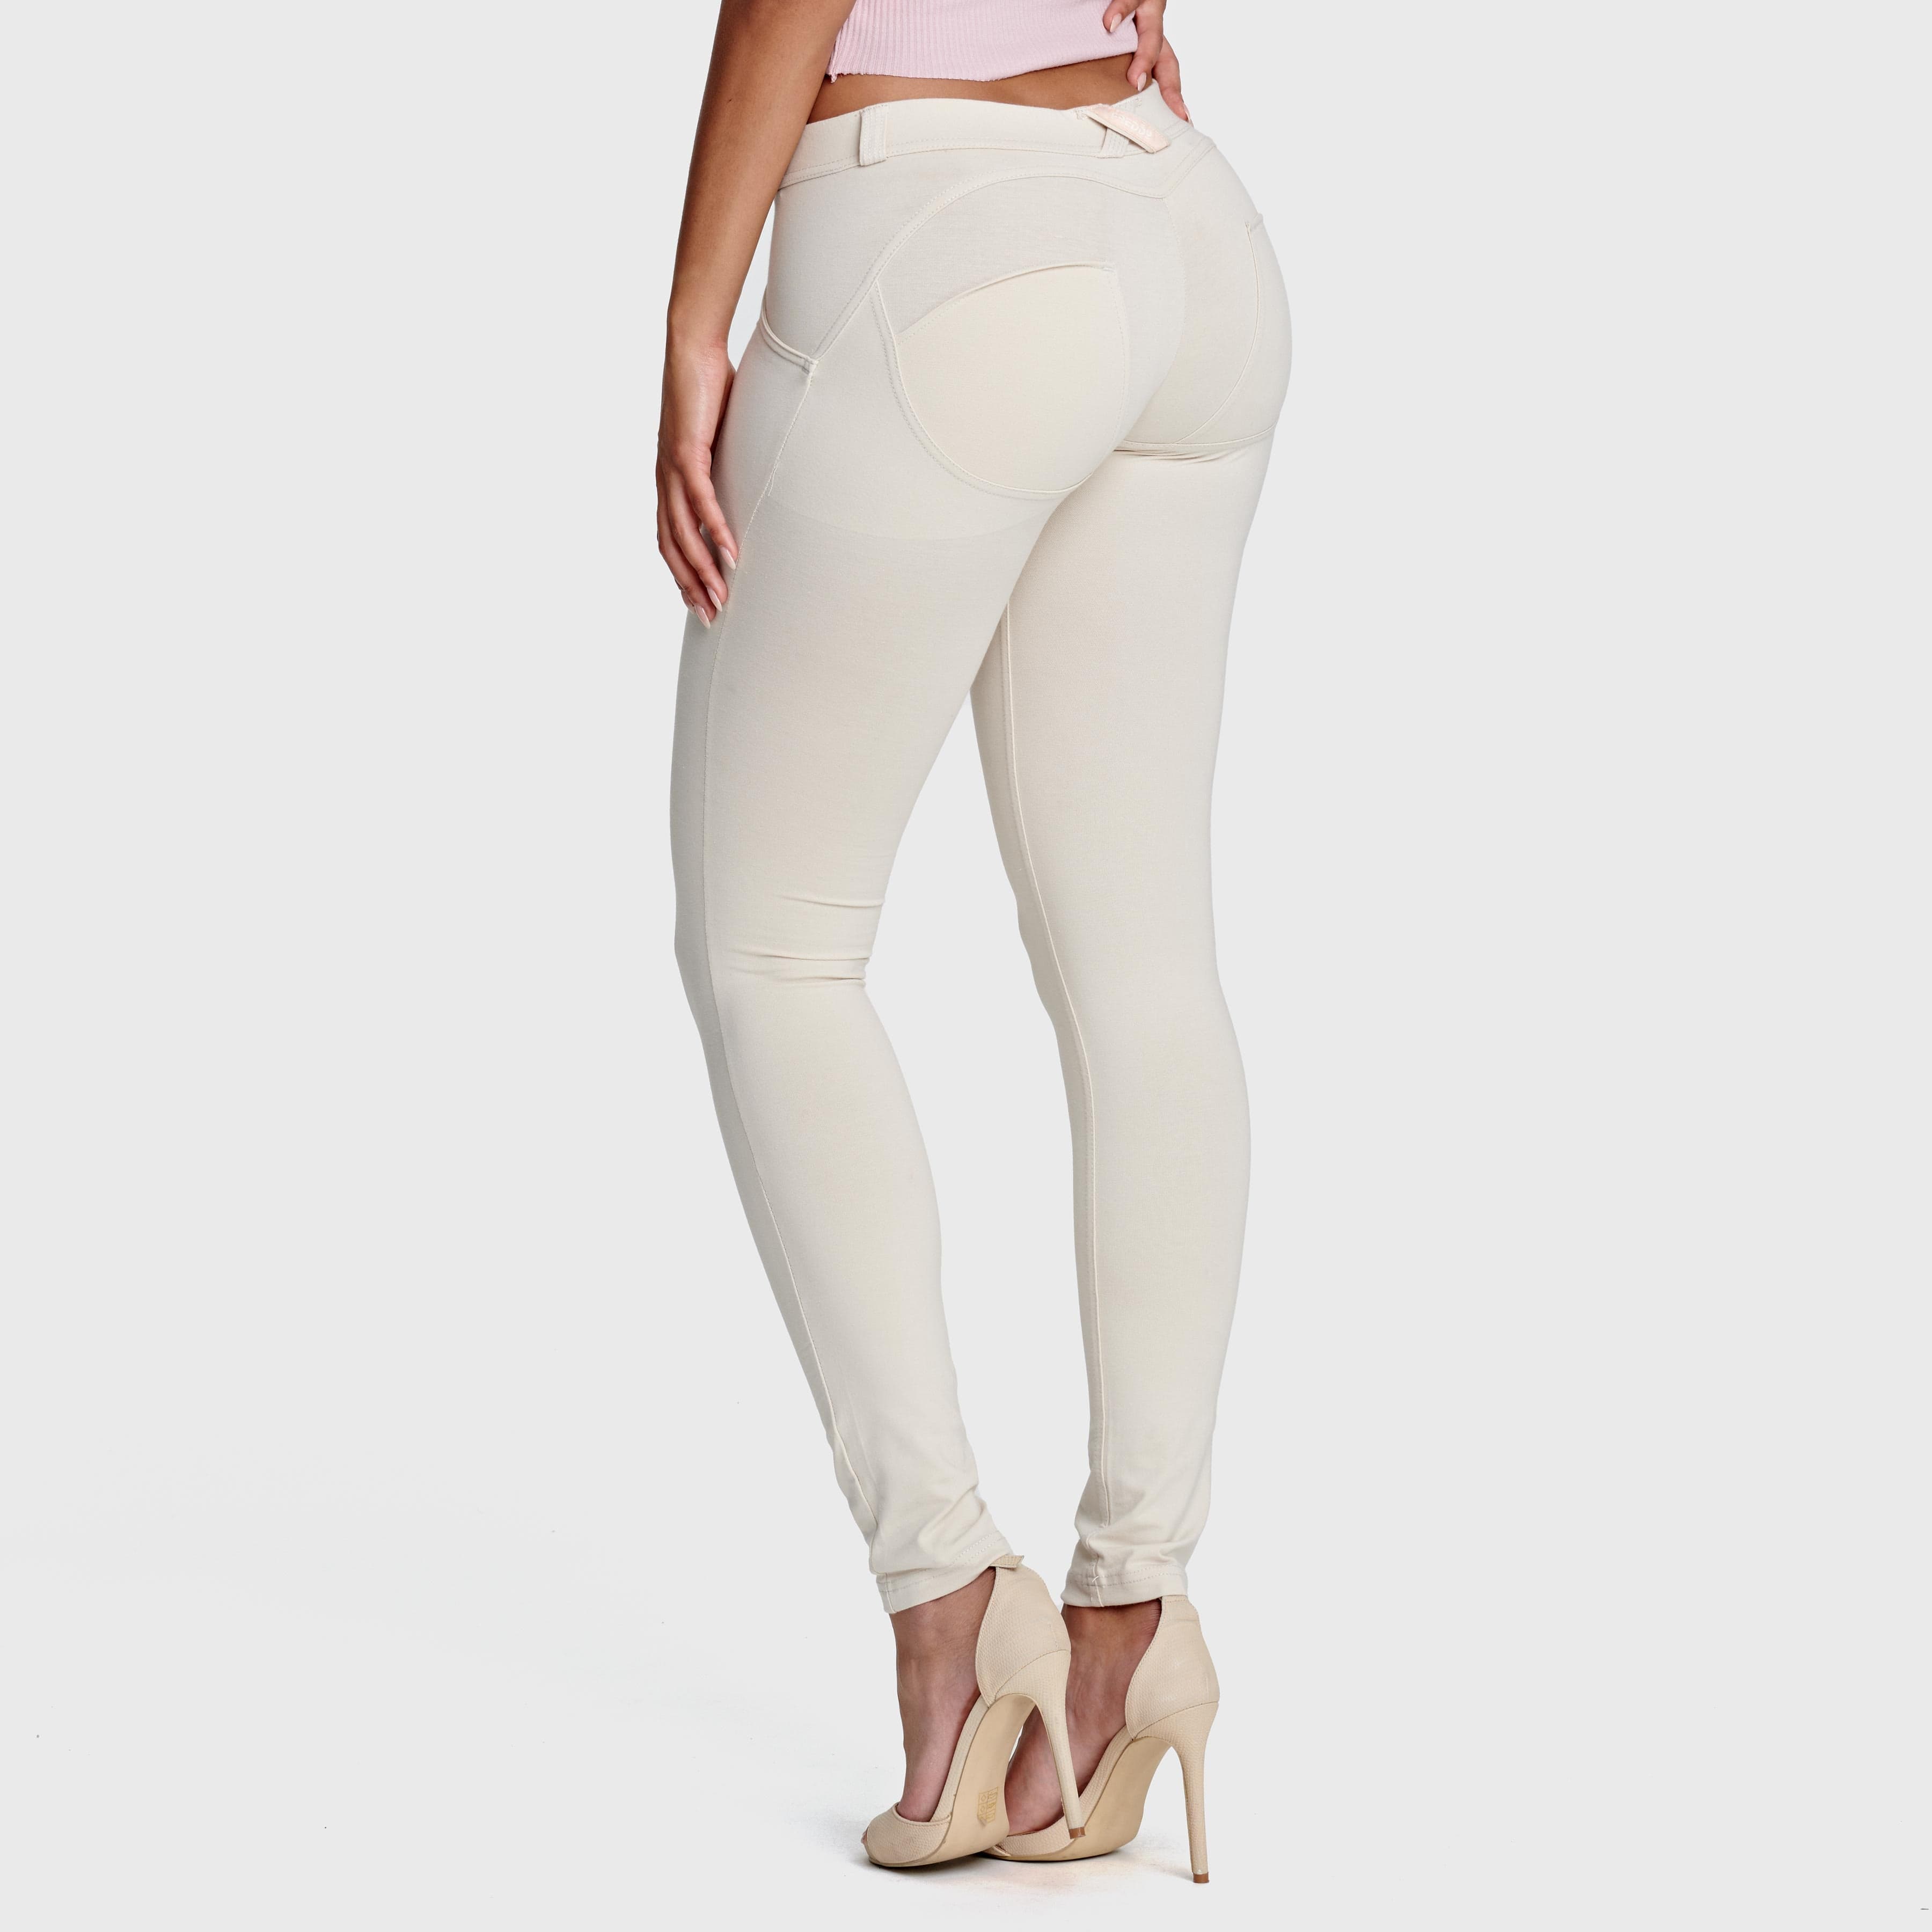 WR.UP® Fashion - Low Rise - Full Length - Light Beige 3